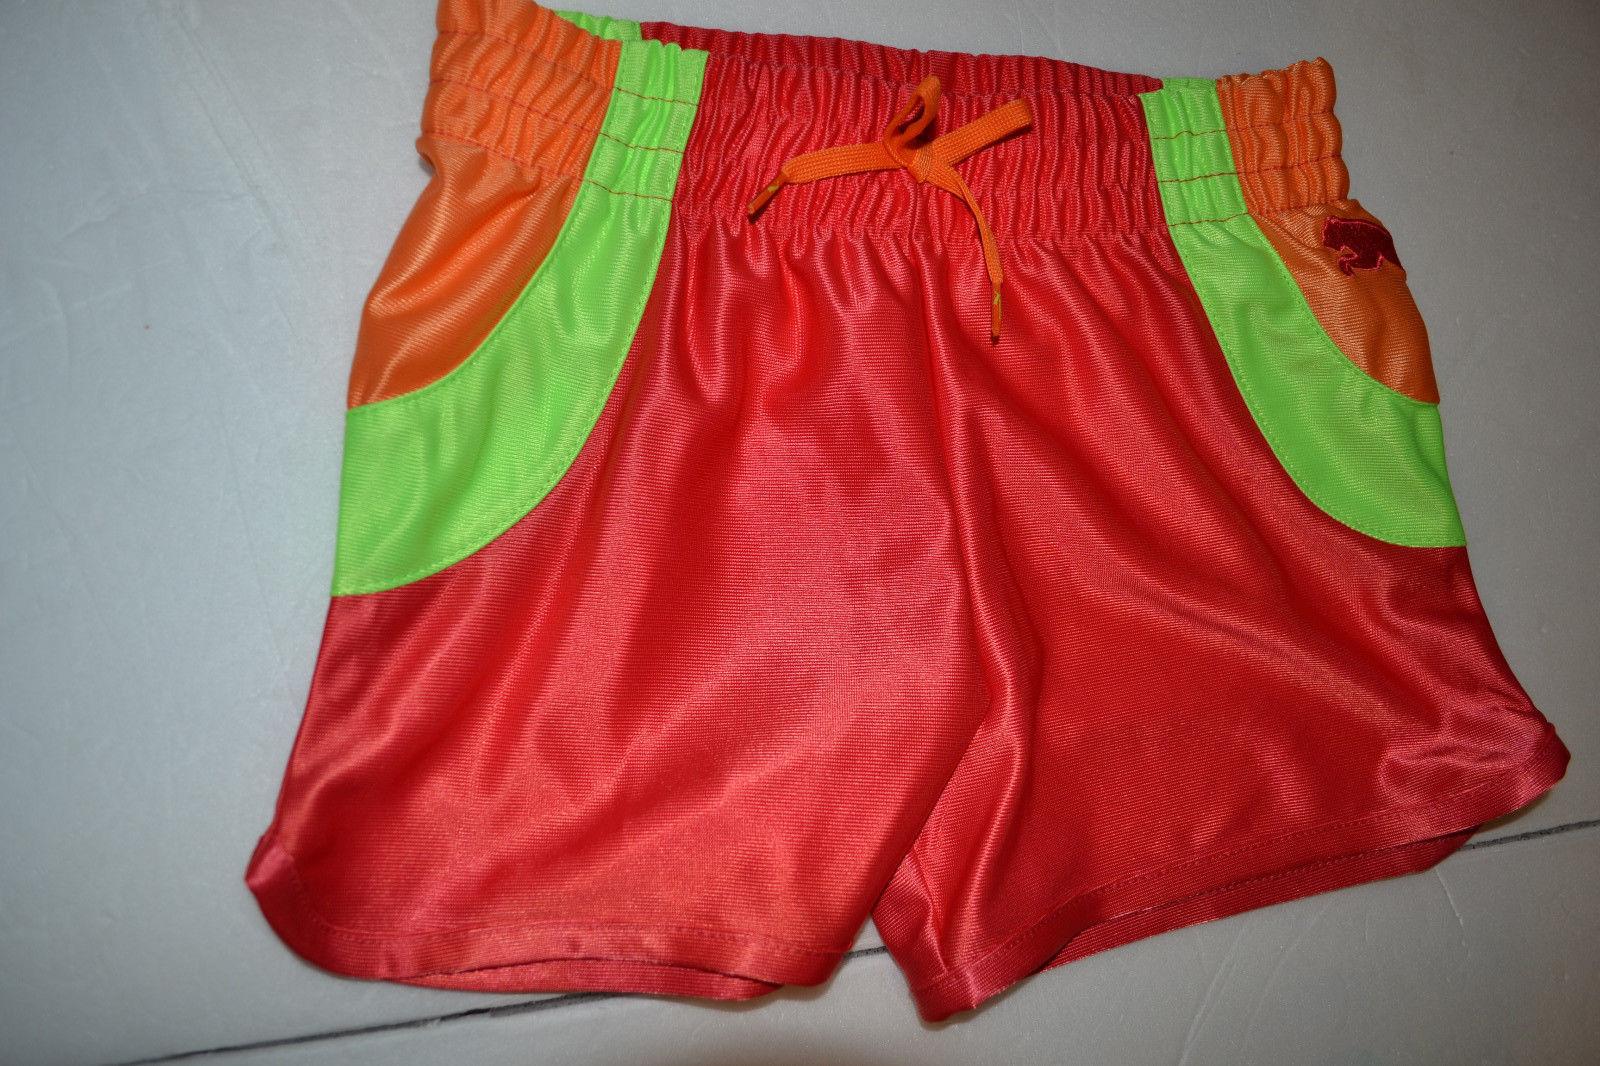 Primary image for Puma Girls  Active Shorts Sizes  5 or 6 or 6X    Nwt  Pink